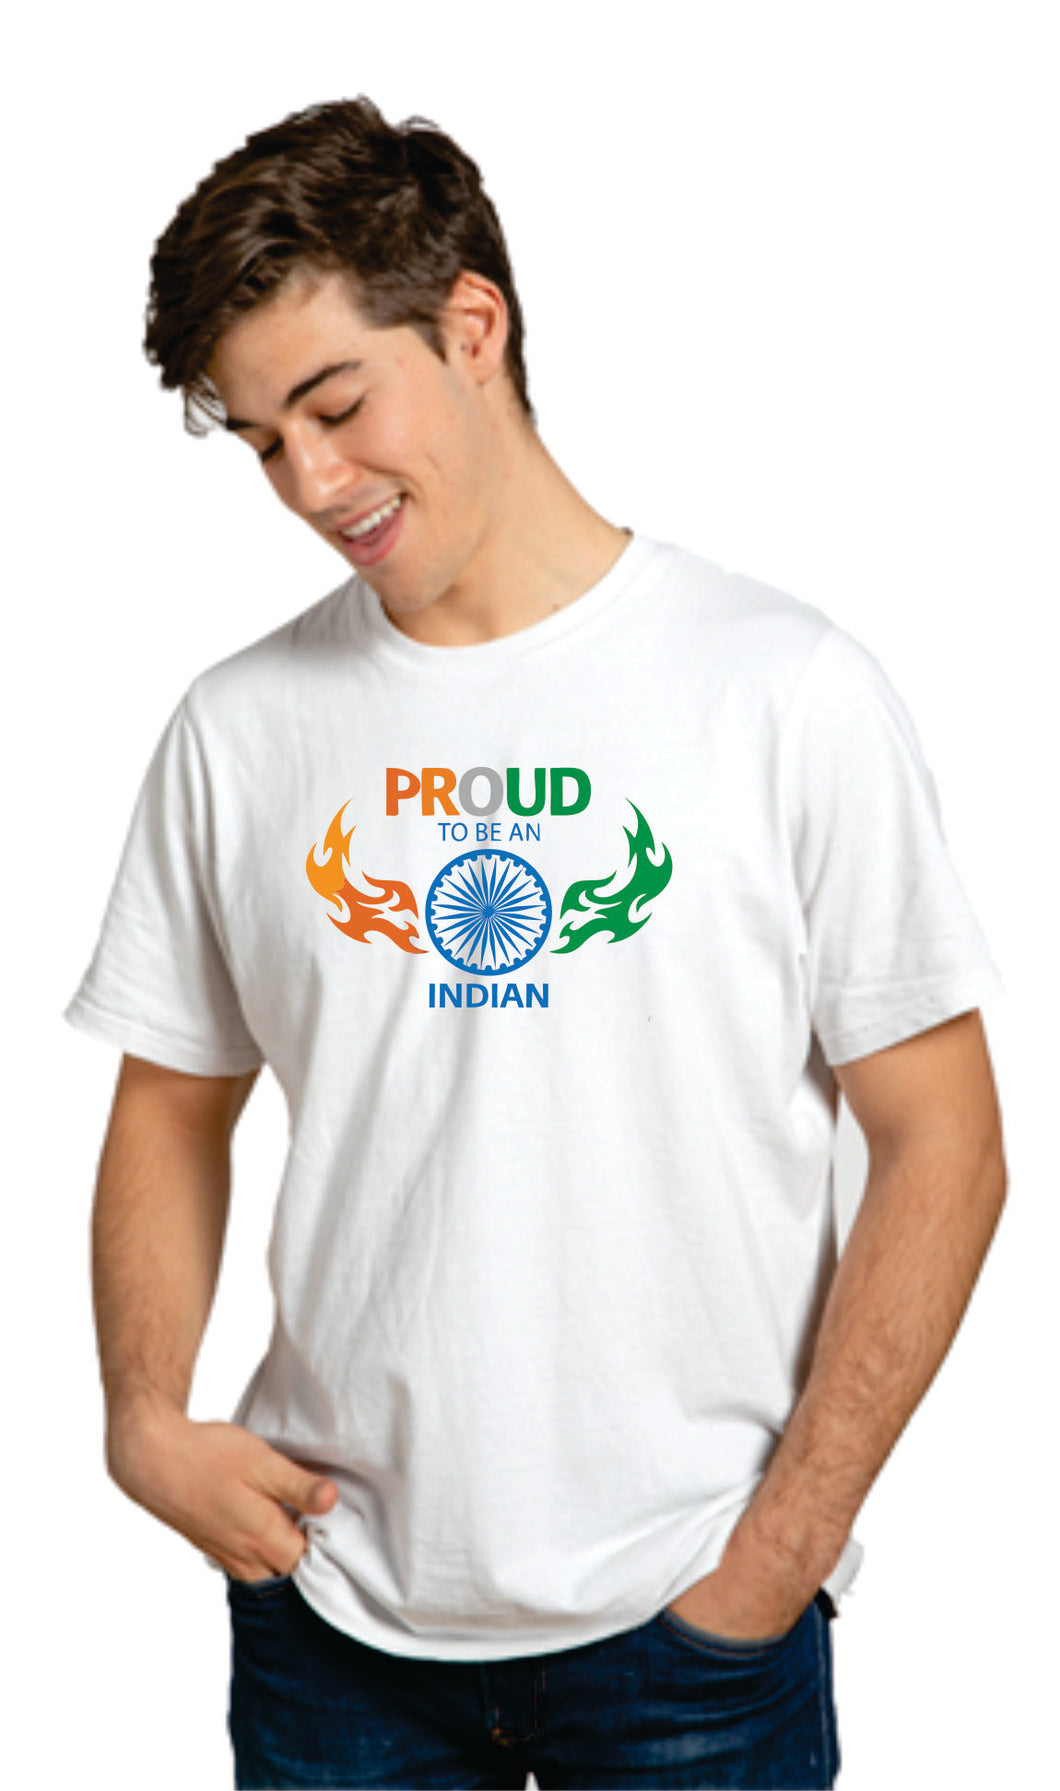 Proud to be Indian Printed Dri Fit Tshirt For Men